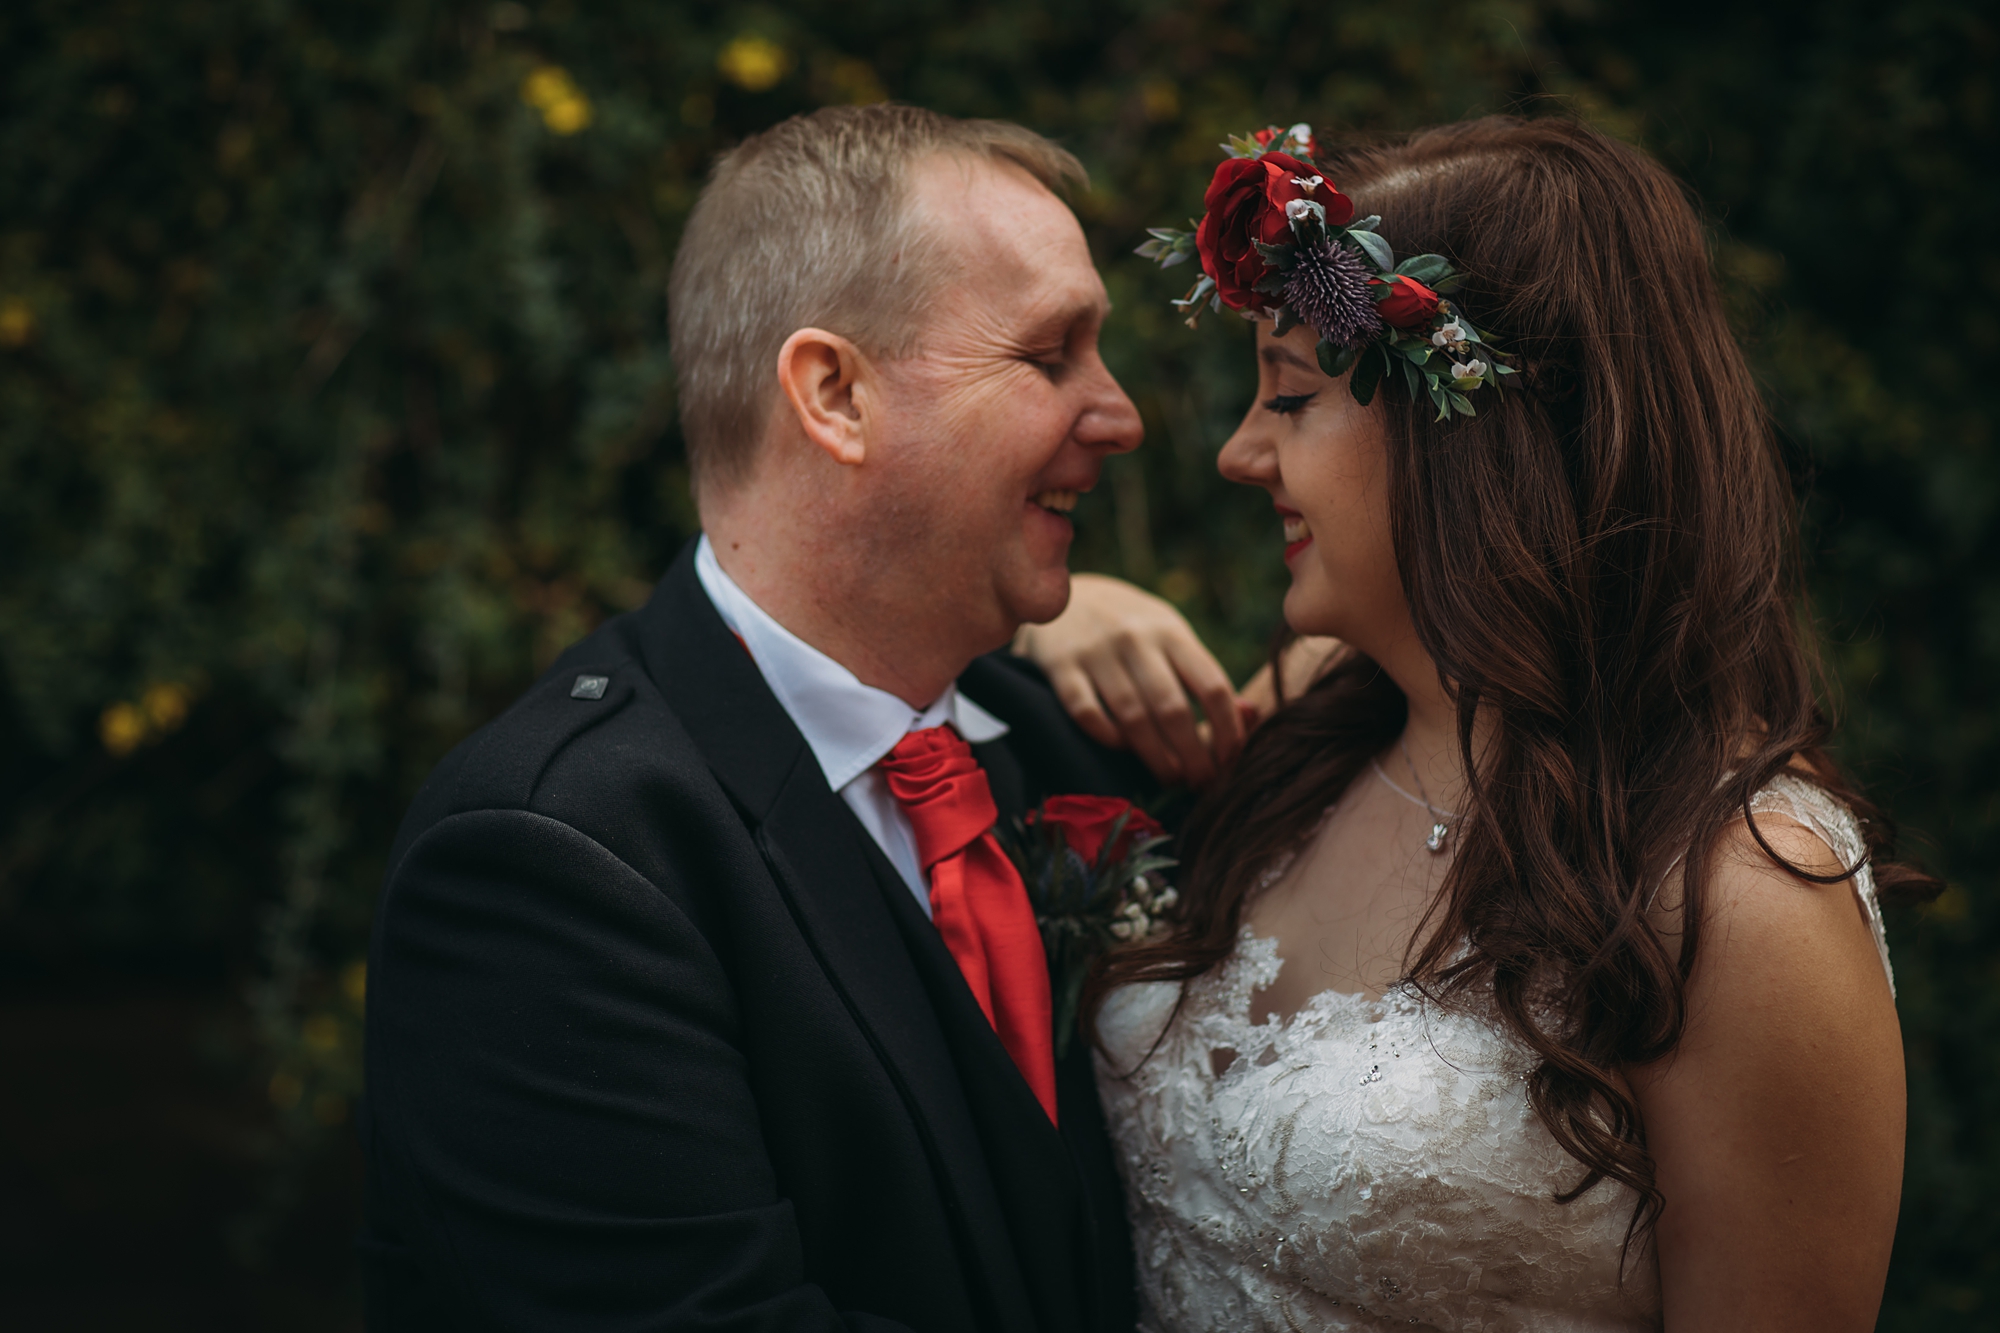 A couple during their Scottish elopement laugh together, best wedding photographs